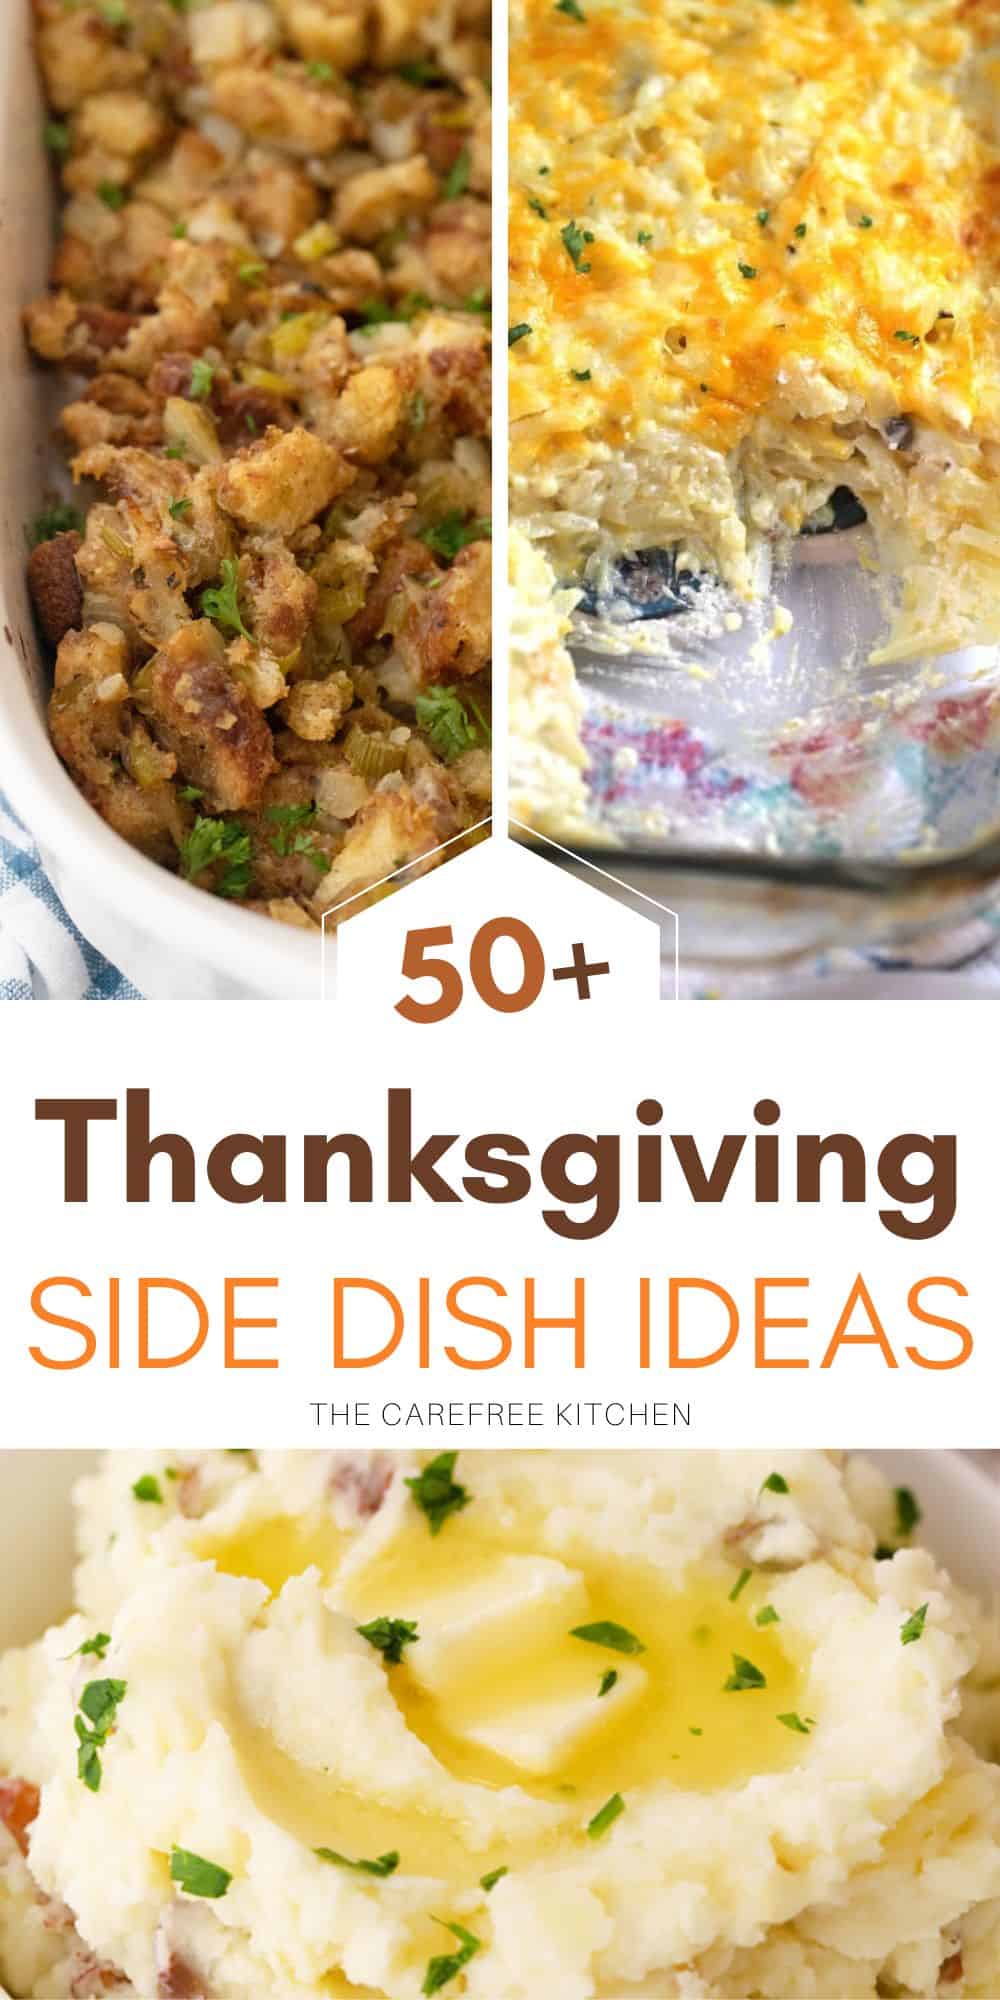 Best Thanksgiving Side Dishes - The Carefree Kitchen